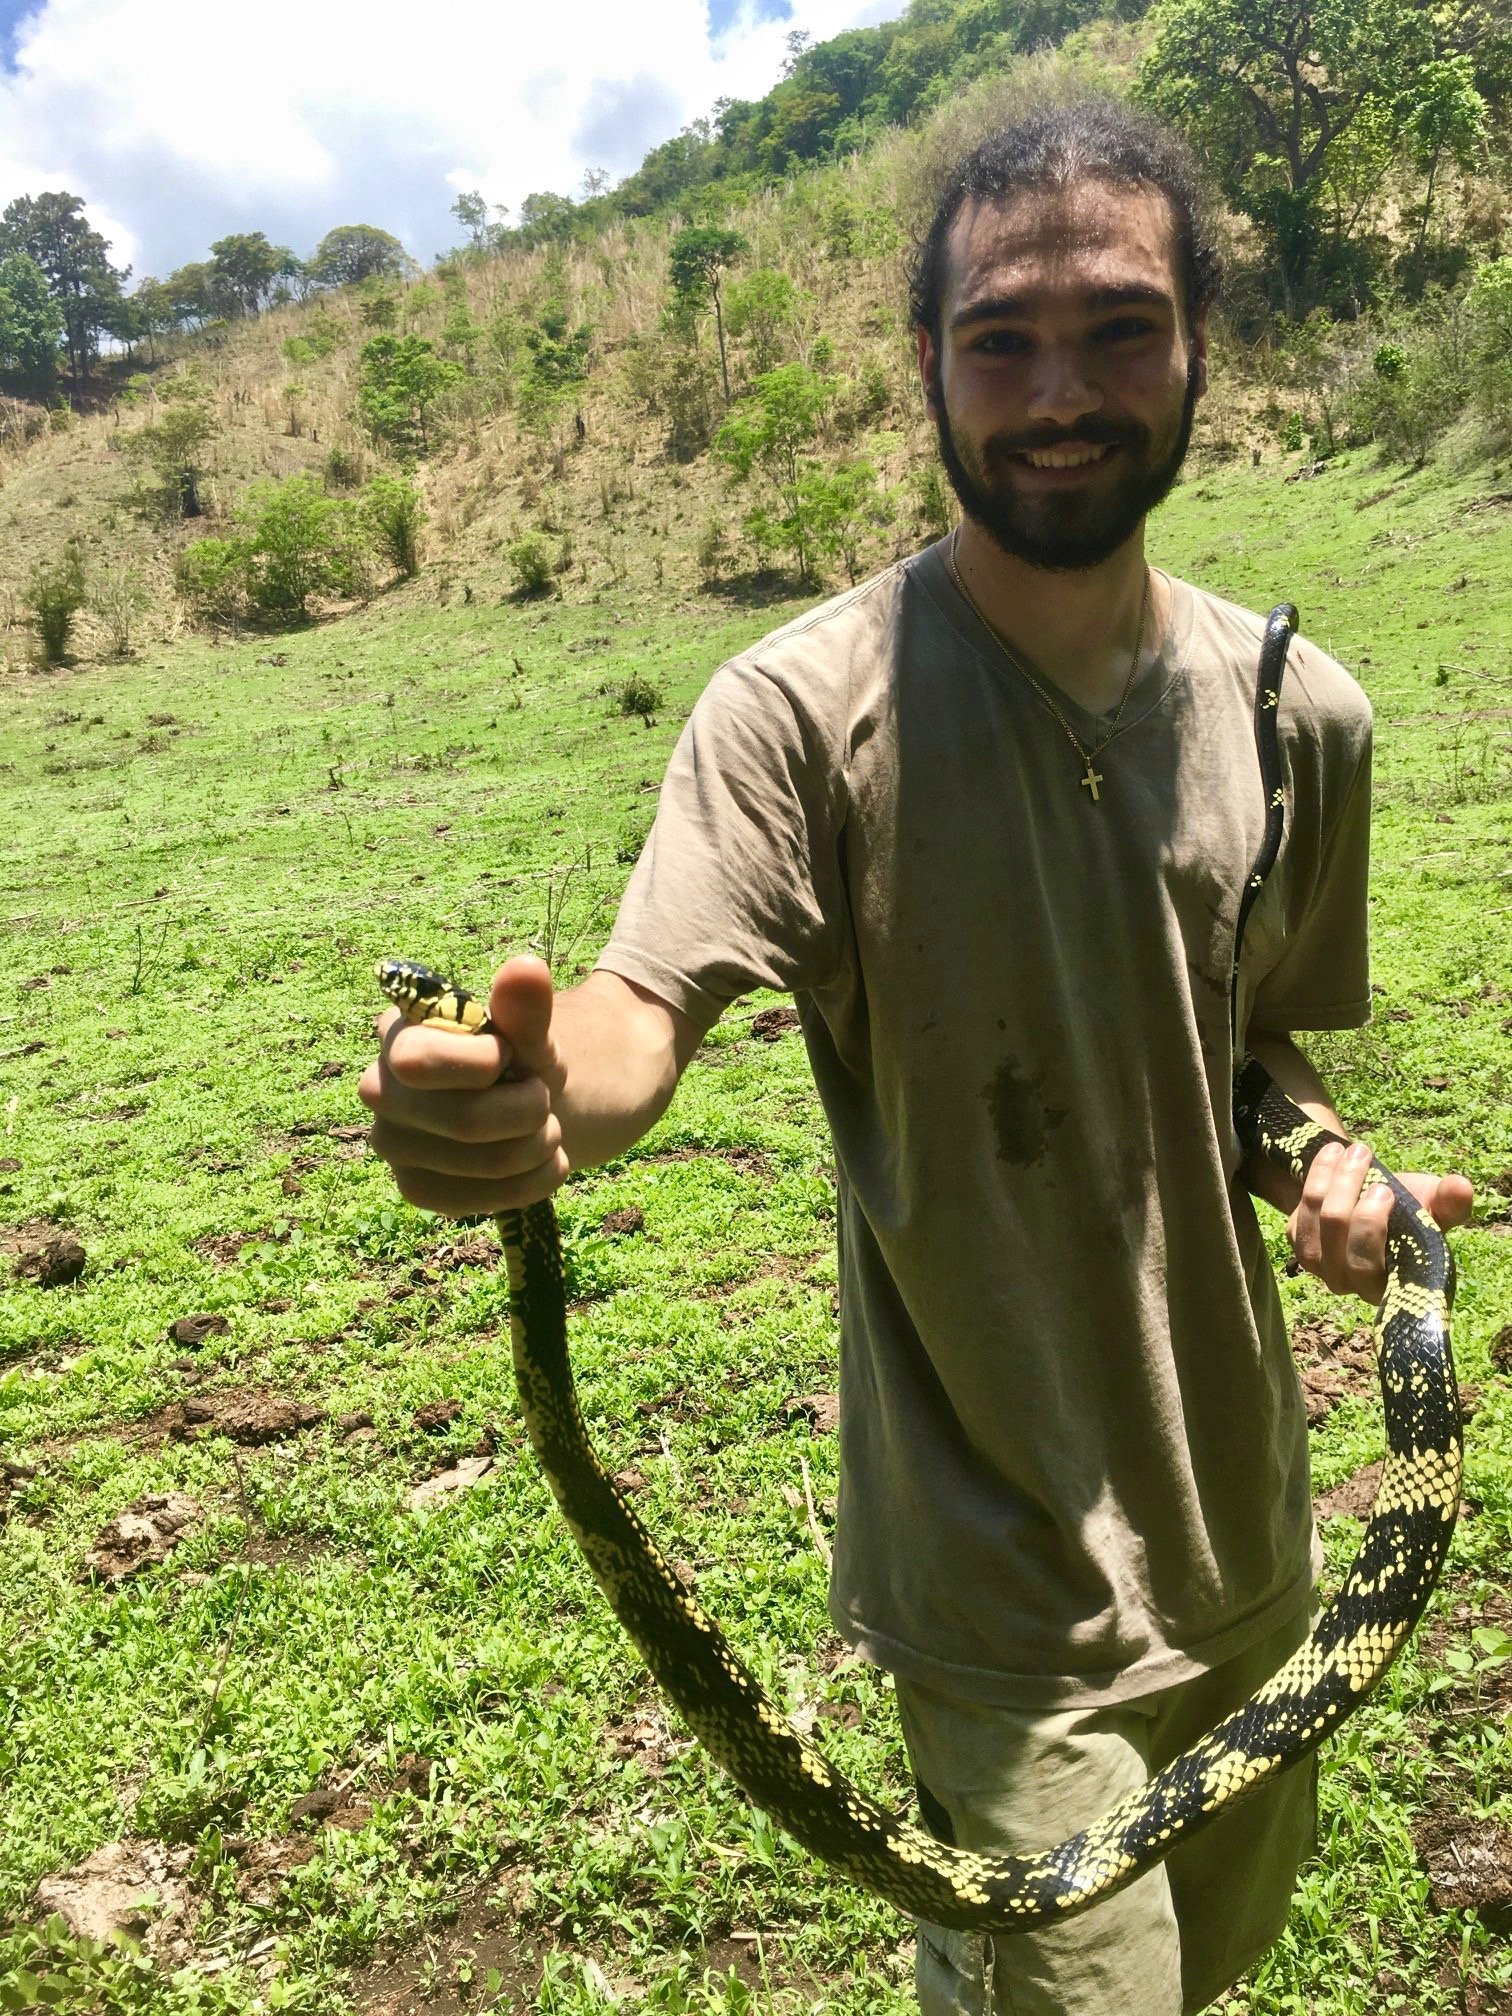    Greg with a hard-earned specimen of a Tiger Rat Snake, Spilotes pullatus, (obtained through a group effort involving machetes, climbing, and a lot of shouting).   